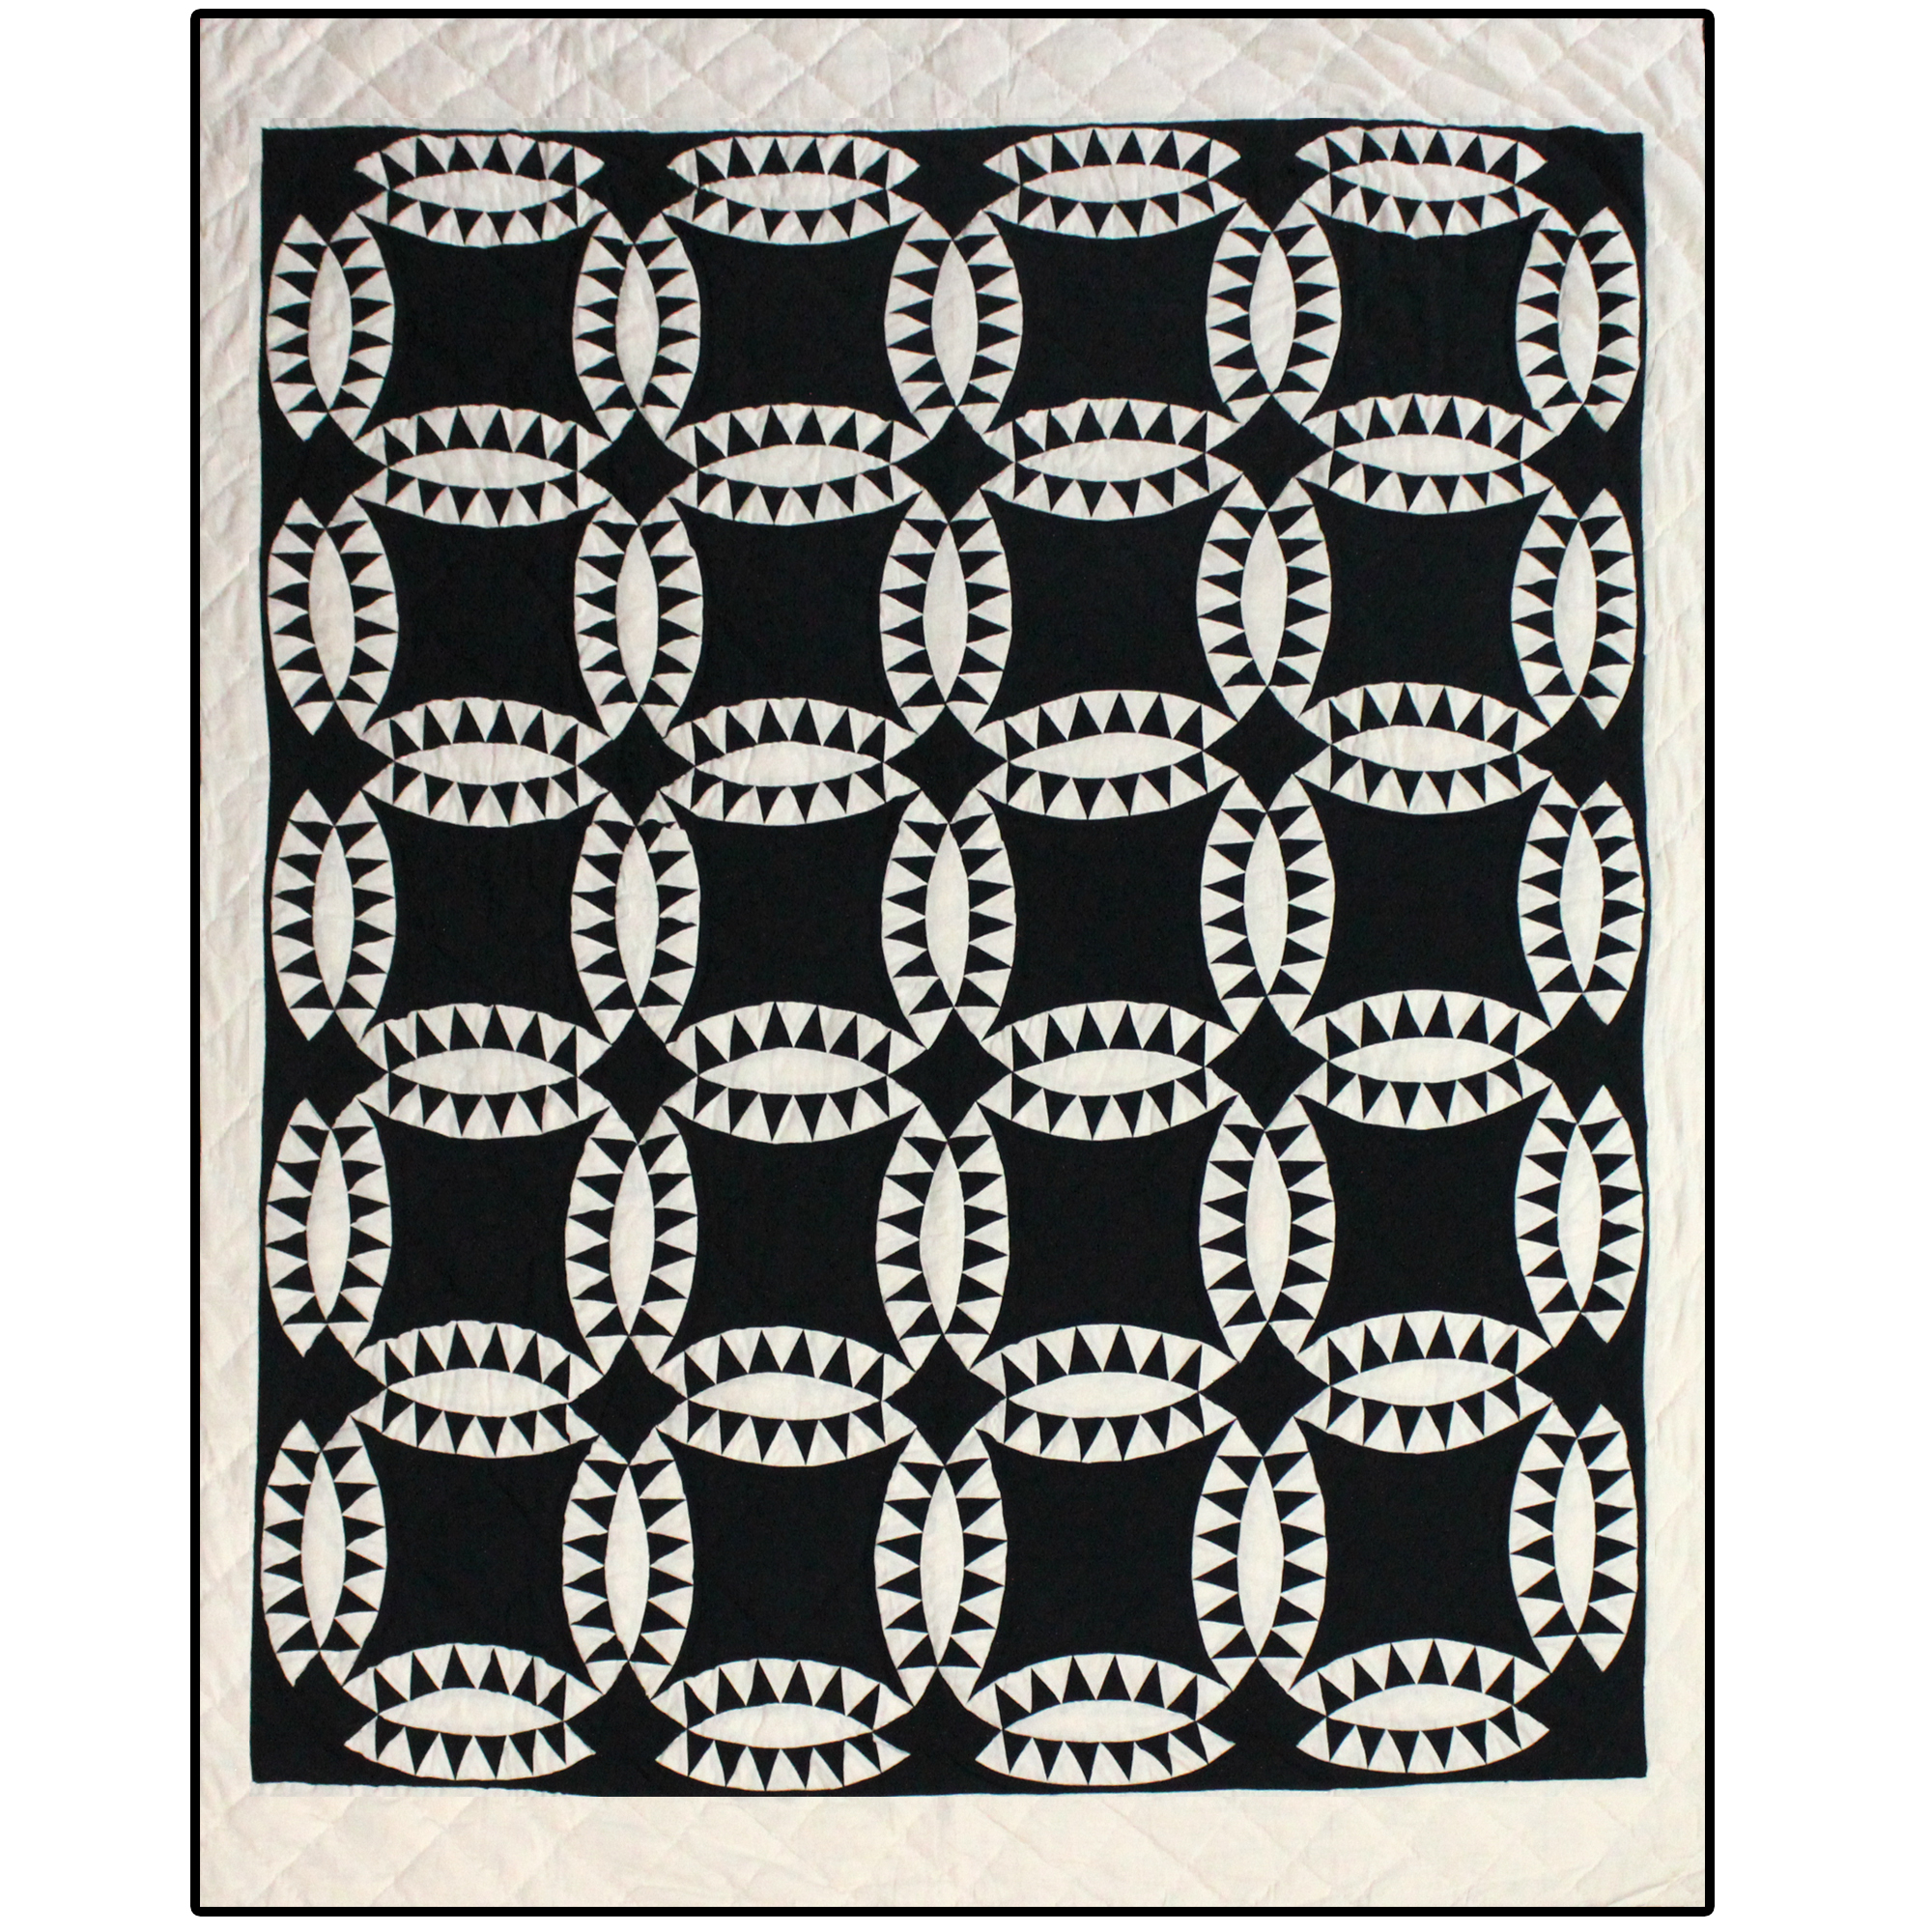 Black and White Wedding Ring Super King Quilt 110"W x 96"L